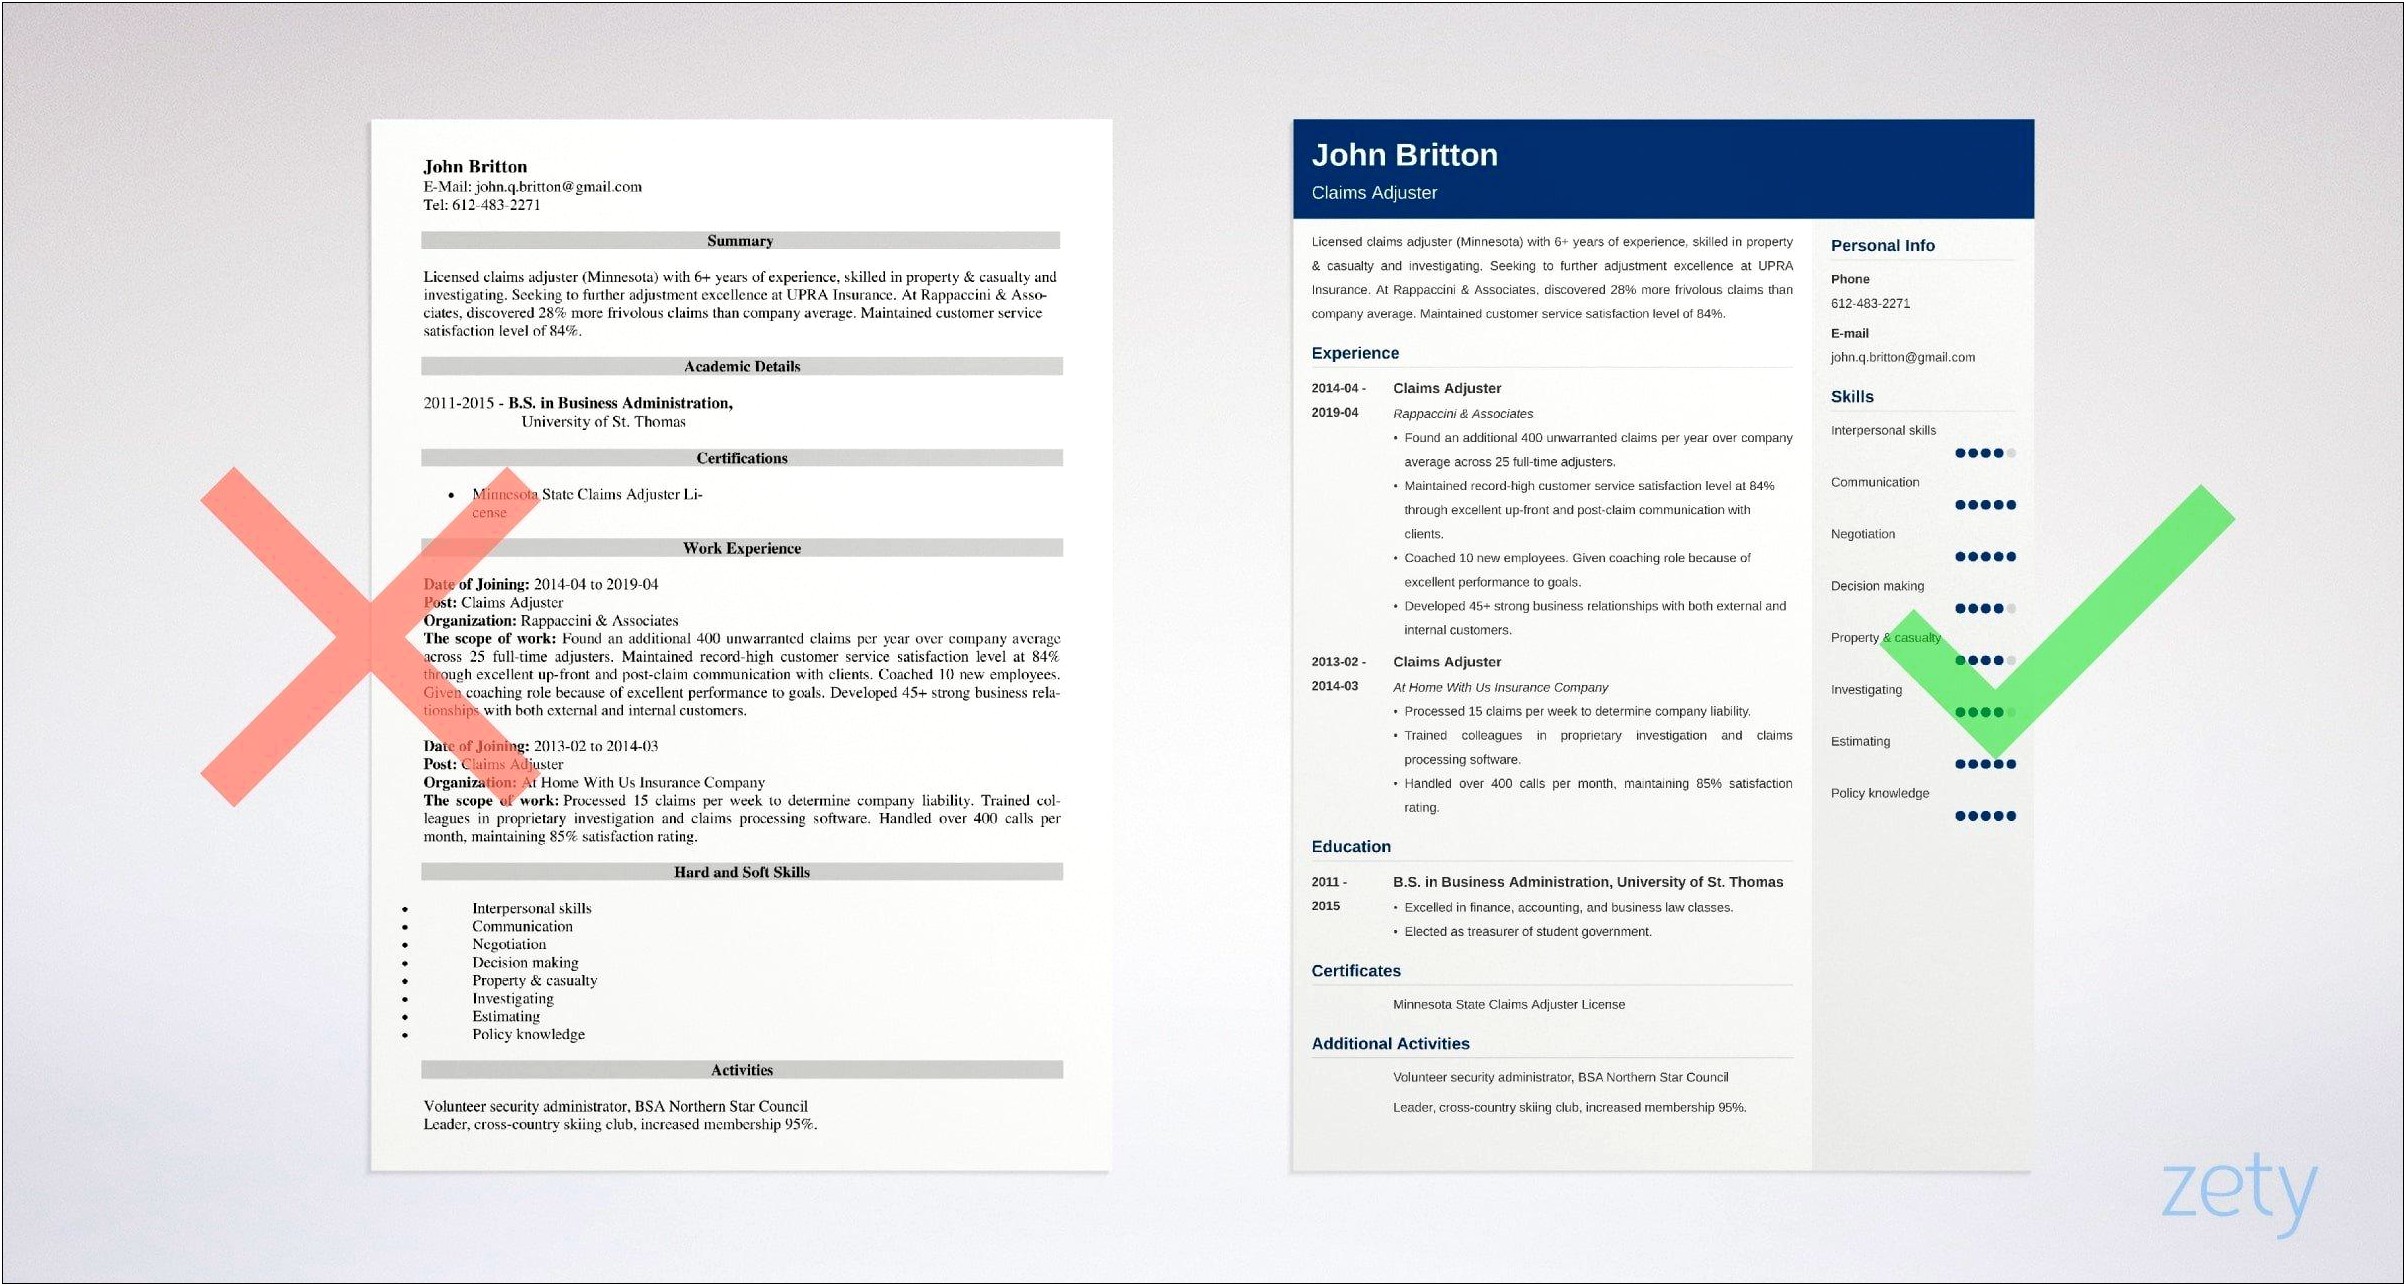 Resume Summary Examples For Claims Adjuster